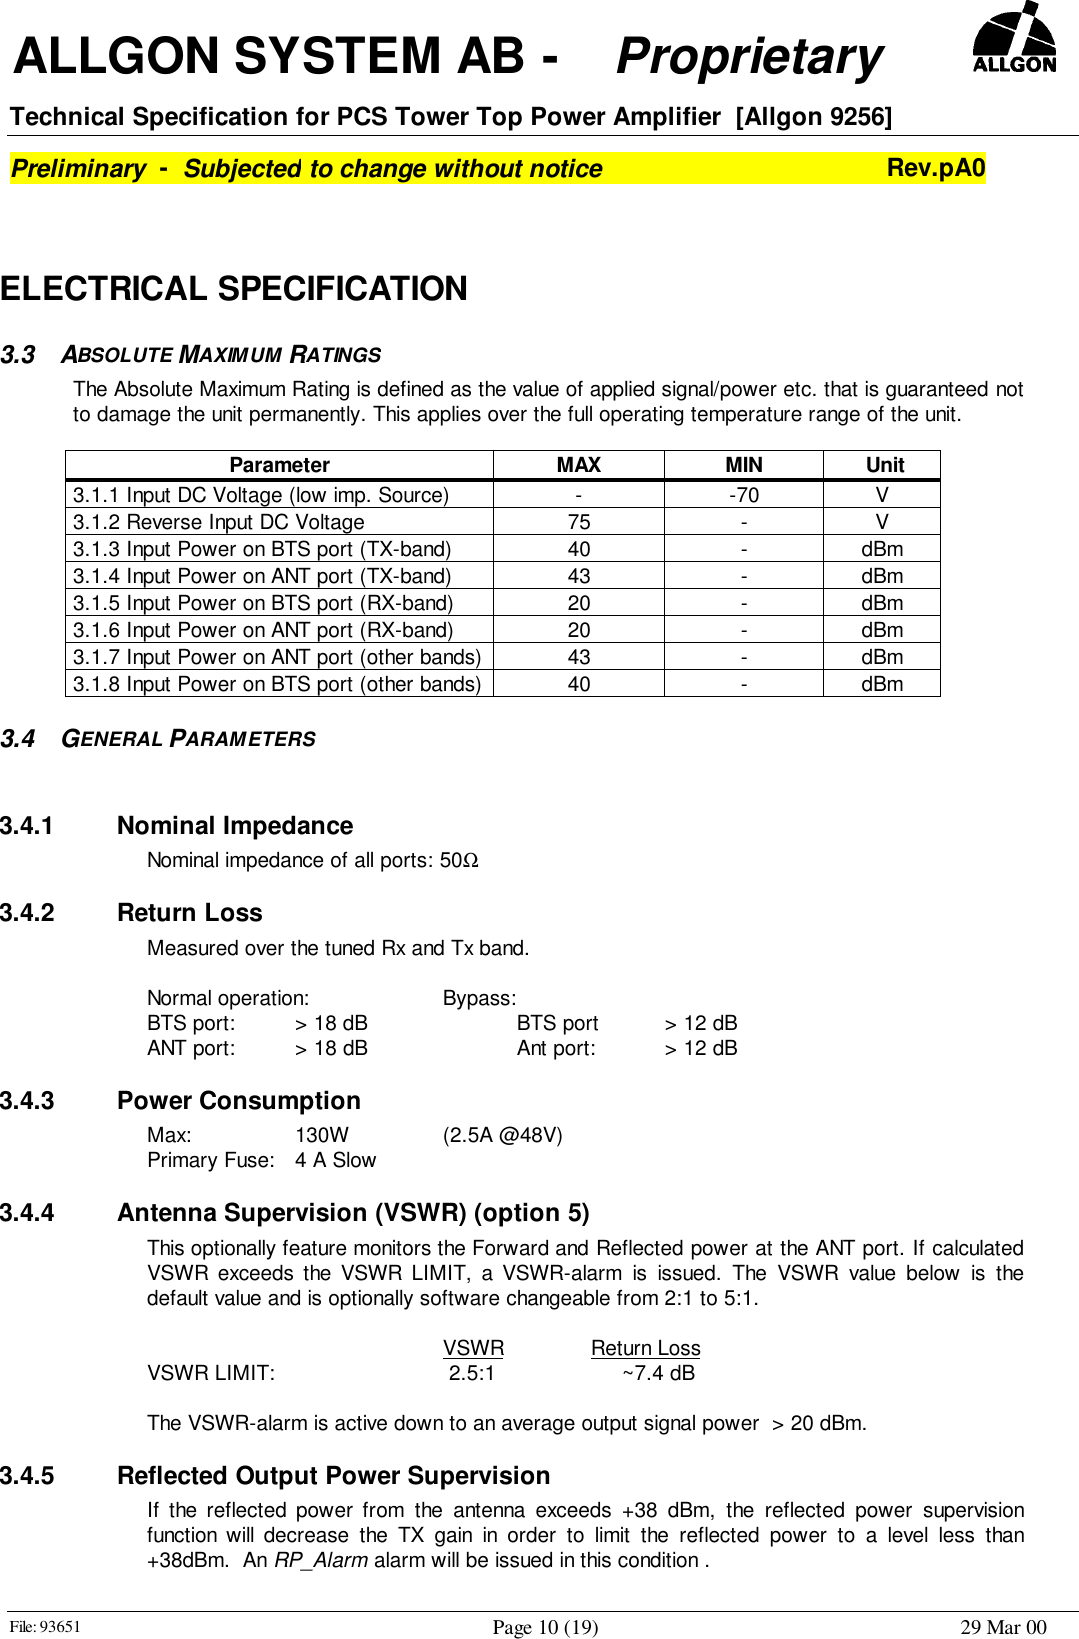  ALLGON SYSTEM AB -    Proprietary     Technical Specification for PCS Tower Top Power Amplifier  [Allgon 9256]Preliminary  -  Subjected to change without notice Rev.pA0File: 93651 Page 10 (19) 29 Mar 00ELECTRICAL SPECIFICATION3.3 ABSOLUTE MAXIMUM RATINGS The Absolute Maximum Rating is defined as the value of applied signal/power etc. that is guaranteed notto damage the unit permanently. This applies over the full operating temperature range of the unit.  Parameter  MAX  MIN   Unit 3.1.1 Input DC Voltage (low imp. Source)  - -70  V 3.1.2 Reverse Input DC Voltage  75  - V 3.1.3 Input Power on BTS port (TX-band)  40  - dBm 3.1.4 Input Power on ANT port (TX-band)  43  - dBm 3.1.5 Input Power on BTS port (RX-band)  20  - dBm 3.1.6 Input Power on ANT port (RX-band)  20  - dBm 3.1.7 Input Power on ANT port (other bands)  43  - dBm 3.1.8 Input Power on BTS port (other bands)  40  - dBm3.4 GENERAL PARAMETERS 3.4.1 Nominal Impedance Nominal impedance of all ports: 50Ω3.4.2 Return Loss  Measured over the tuned Rx and Tx band.  Normal operation: Bypass:  BTS port:  &gt; 18 dB BTS port &gt; 12 dB  ANT port:  &gt; 18 dB Ant port: &gt; 12 dB3.4.3 Power Consumption Max: 130W (2.5A @48V)  Primary Fuse:  4 A Slow3.4.4  Antenna Supervision (VSWR) (option 5) This optionally feature monitors the Forward and Reflected power at the ANT port. If calculatedVSWR exceeds the VSWR LIMIT, a VSWR-alarm is issued. The VSWR value below is thedefault value and is optionally software changeable from 2:1 to 5:1.  VSWR Return Loss VSWR LIMIT:   2.5:1      ~7.4 dB  The VSWR-alarm is active down to an average output signal power  &gt; 20 dBm.3.4.5  Reflected Output Power Supervision If the reflected power from the antenna exceeds +38 dBm, the reflected power supervisionfunction will decrease the TX gain in order to limit the reflected power to a level less than+38dBm.  An RP_Alarm alarm will be issued in this condition .